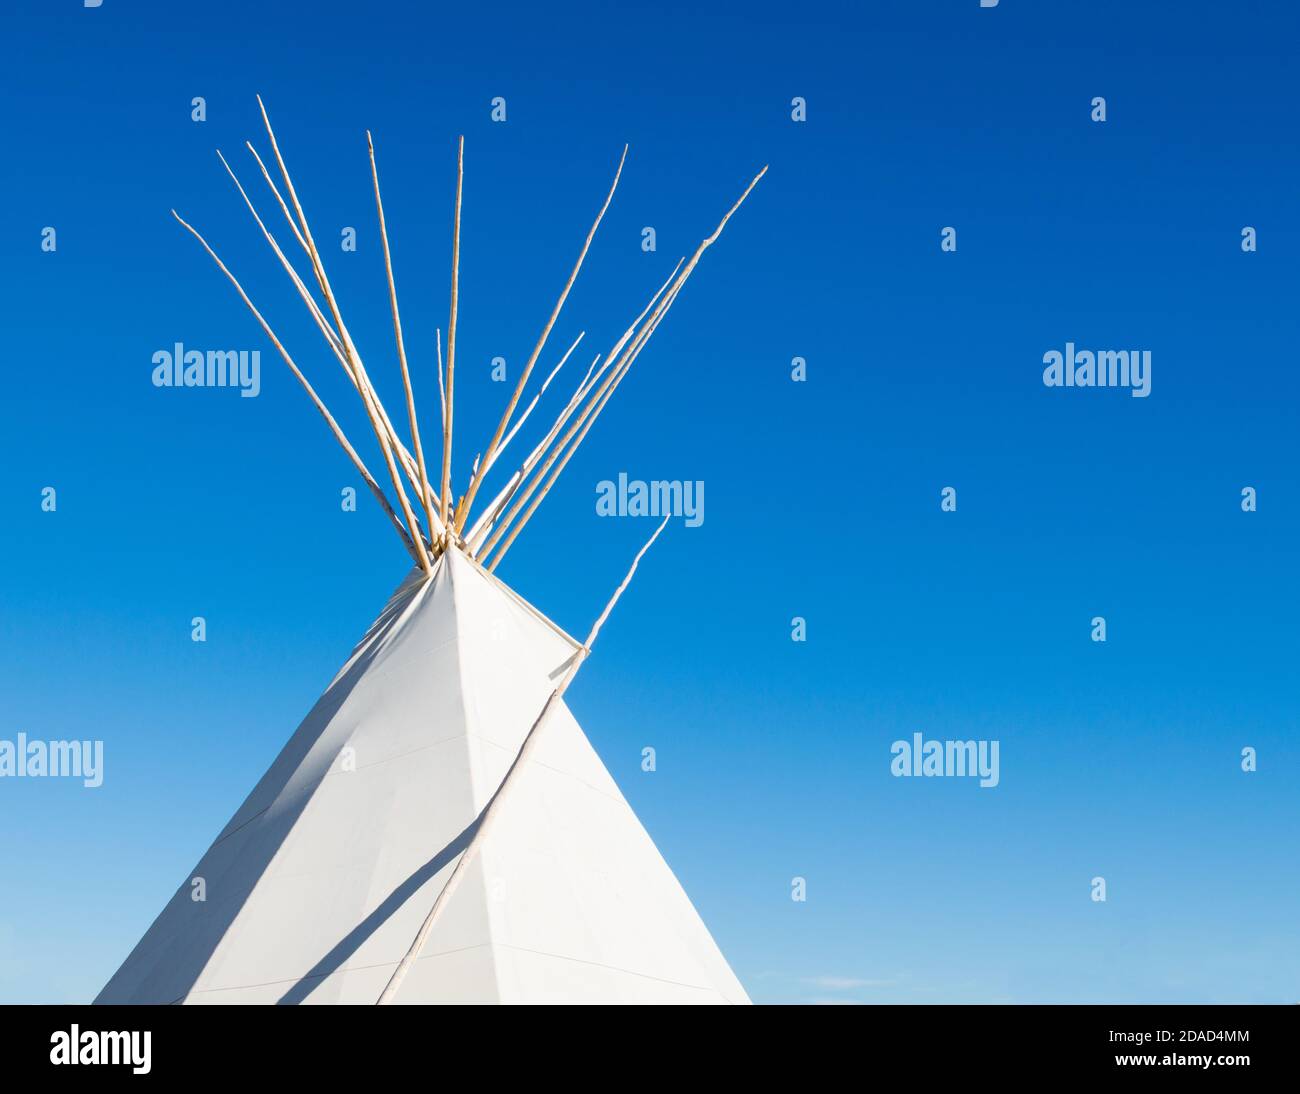 a Native American tipi against a bright blue sky with copy space Stock Photo